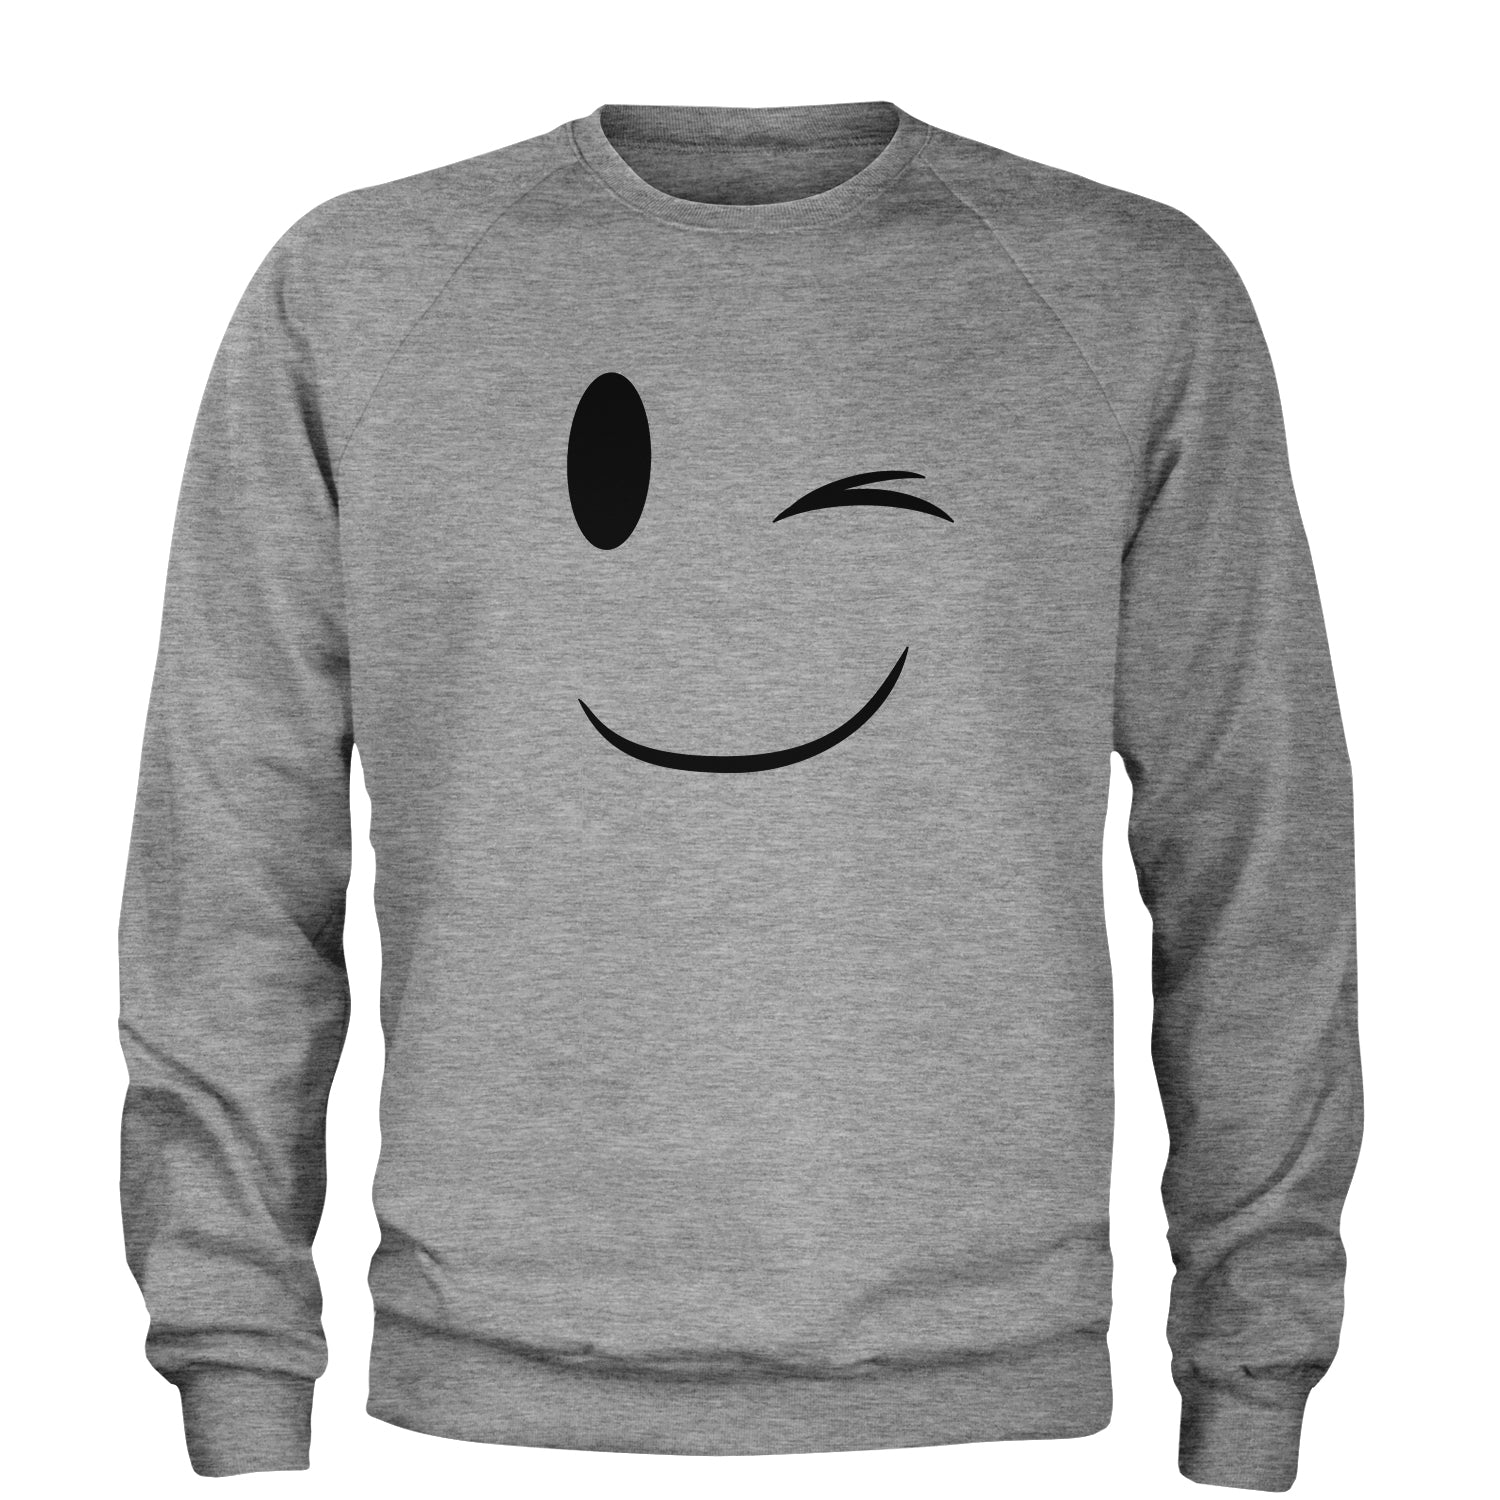 Emoticon Winking Smile Face Adult Crewneck Sweatshirt cosplay, costume, dress, emoji, emote, face, halloween, smiley, up, yellow by Expression Tees